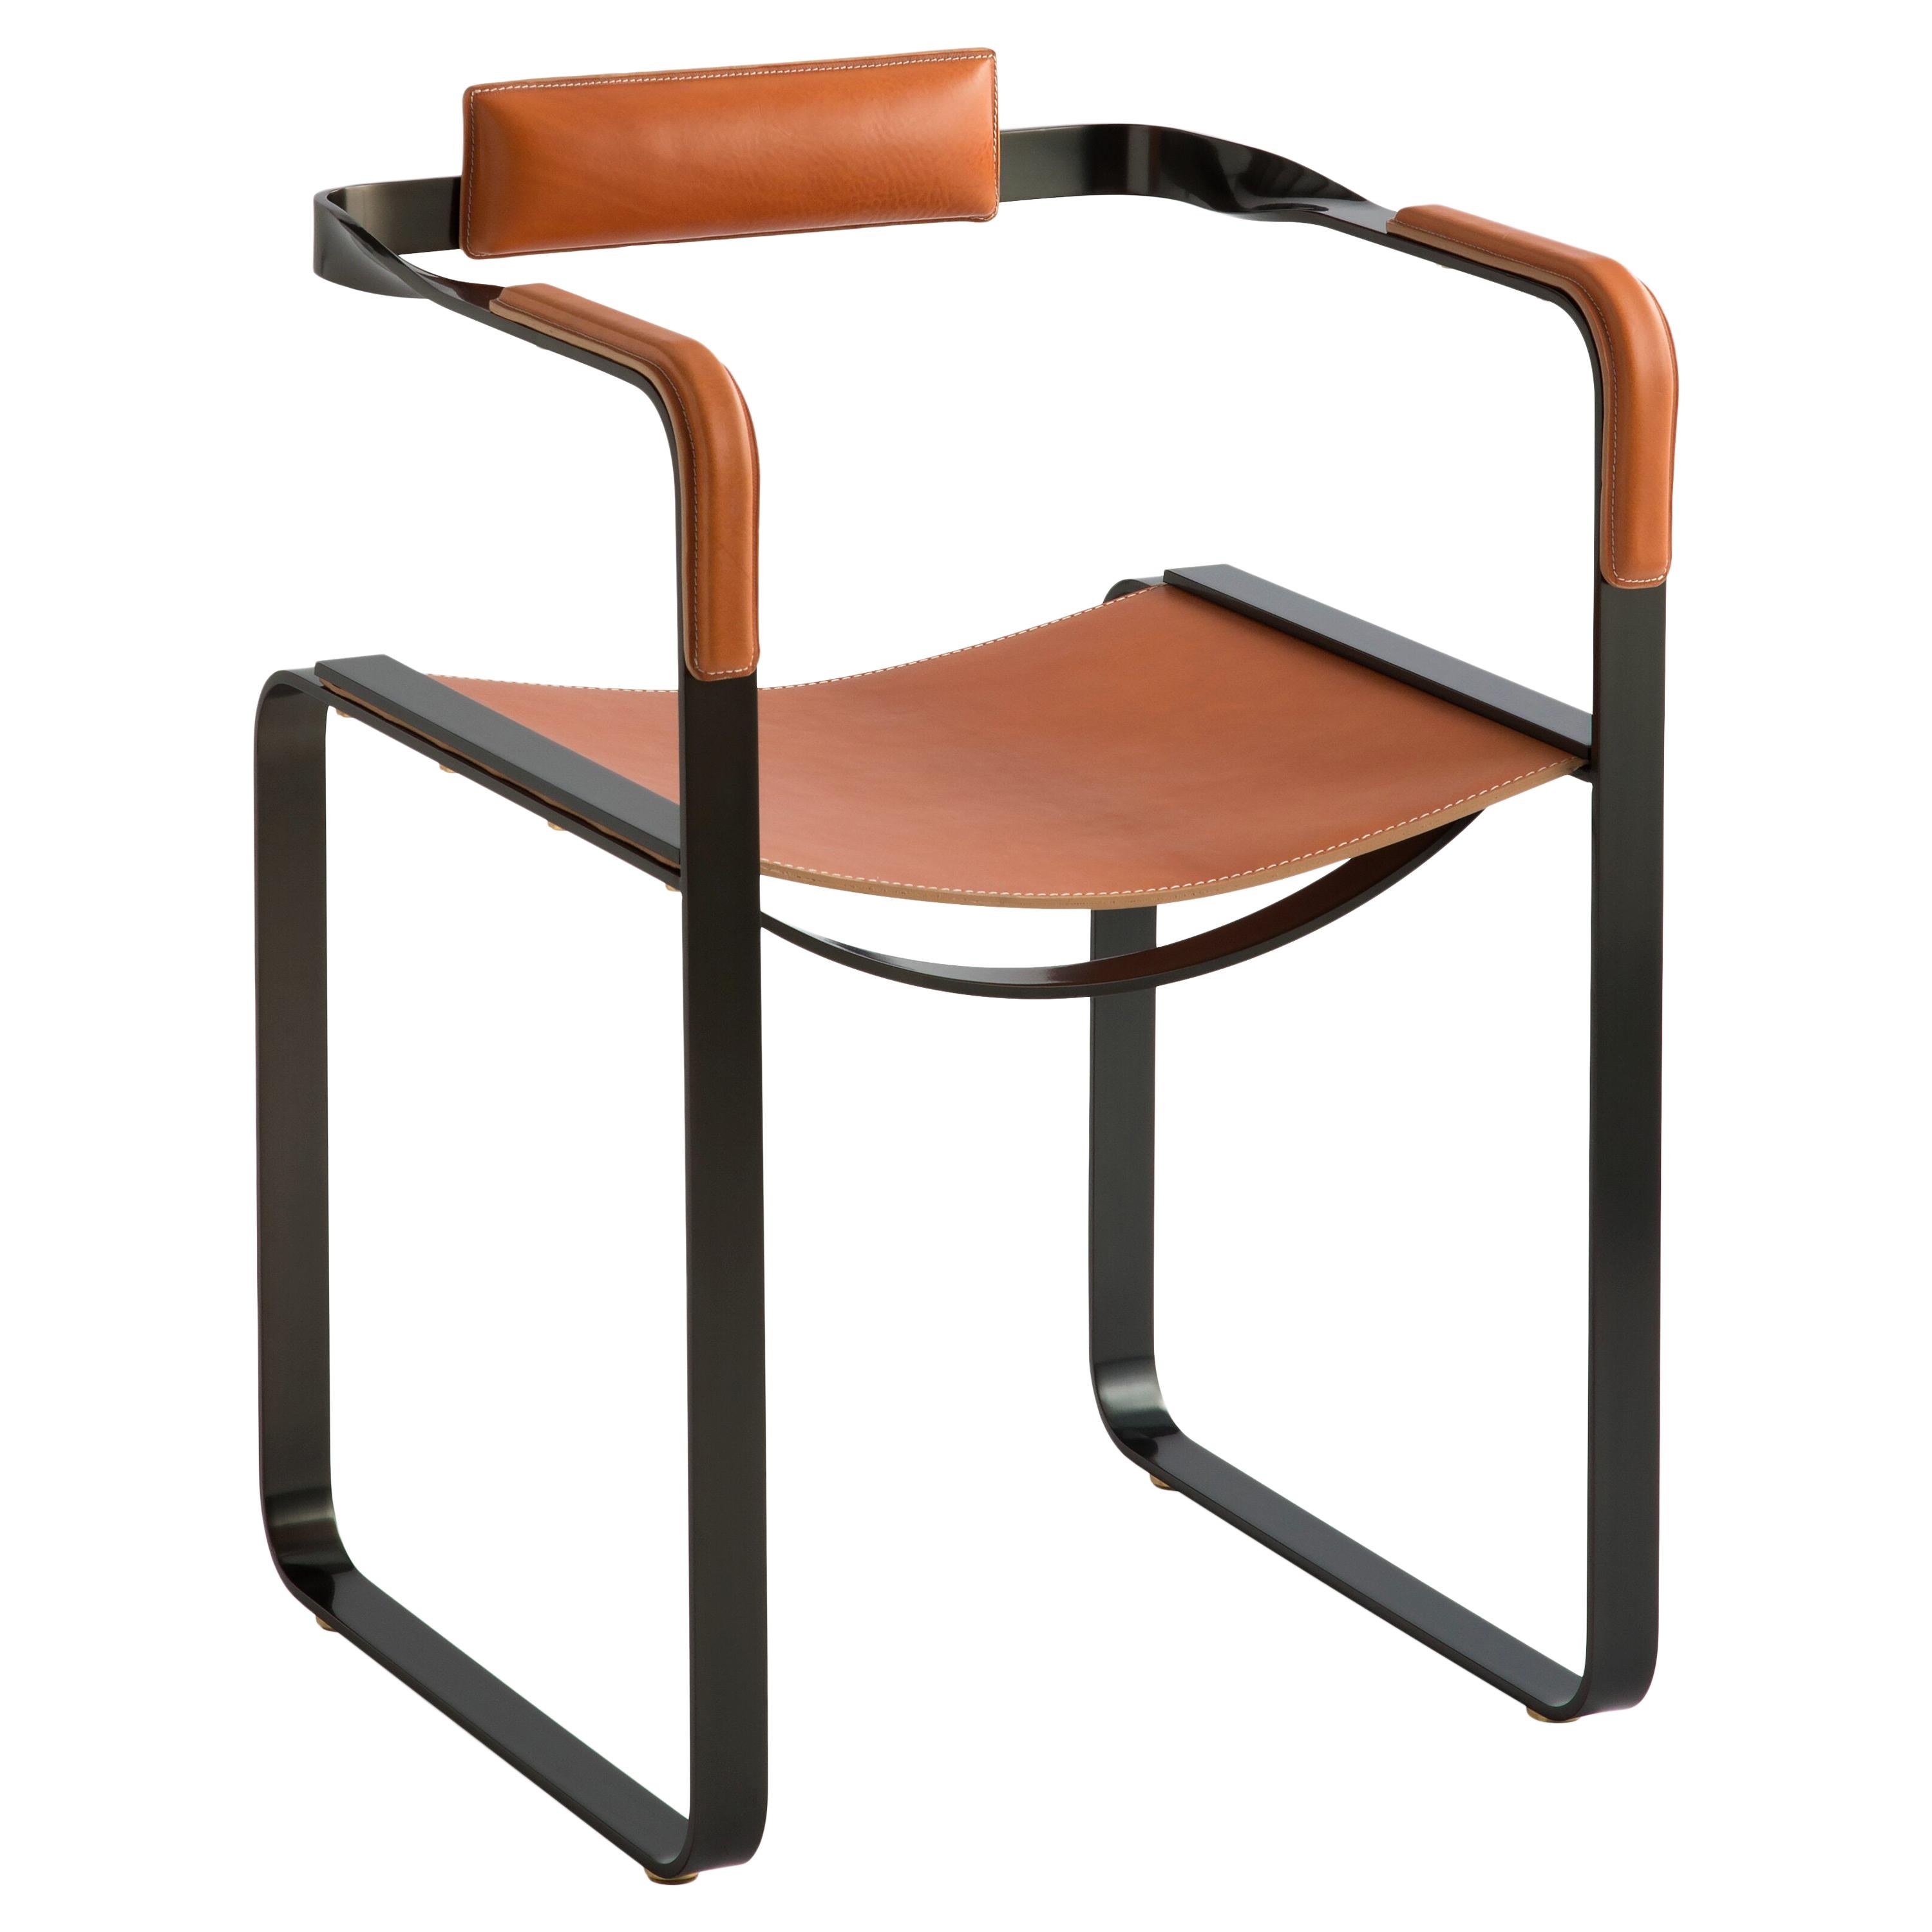 Armchair, Black Smoke Steel & Natural Tobacco Saddle Leather Contemporary Design